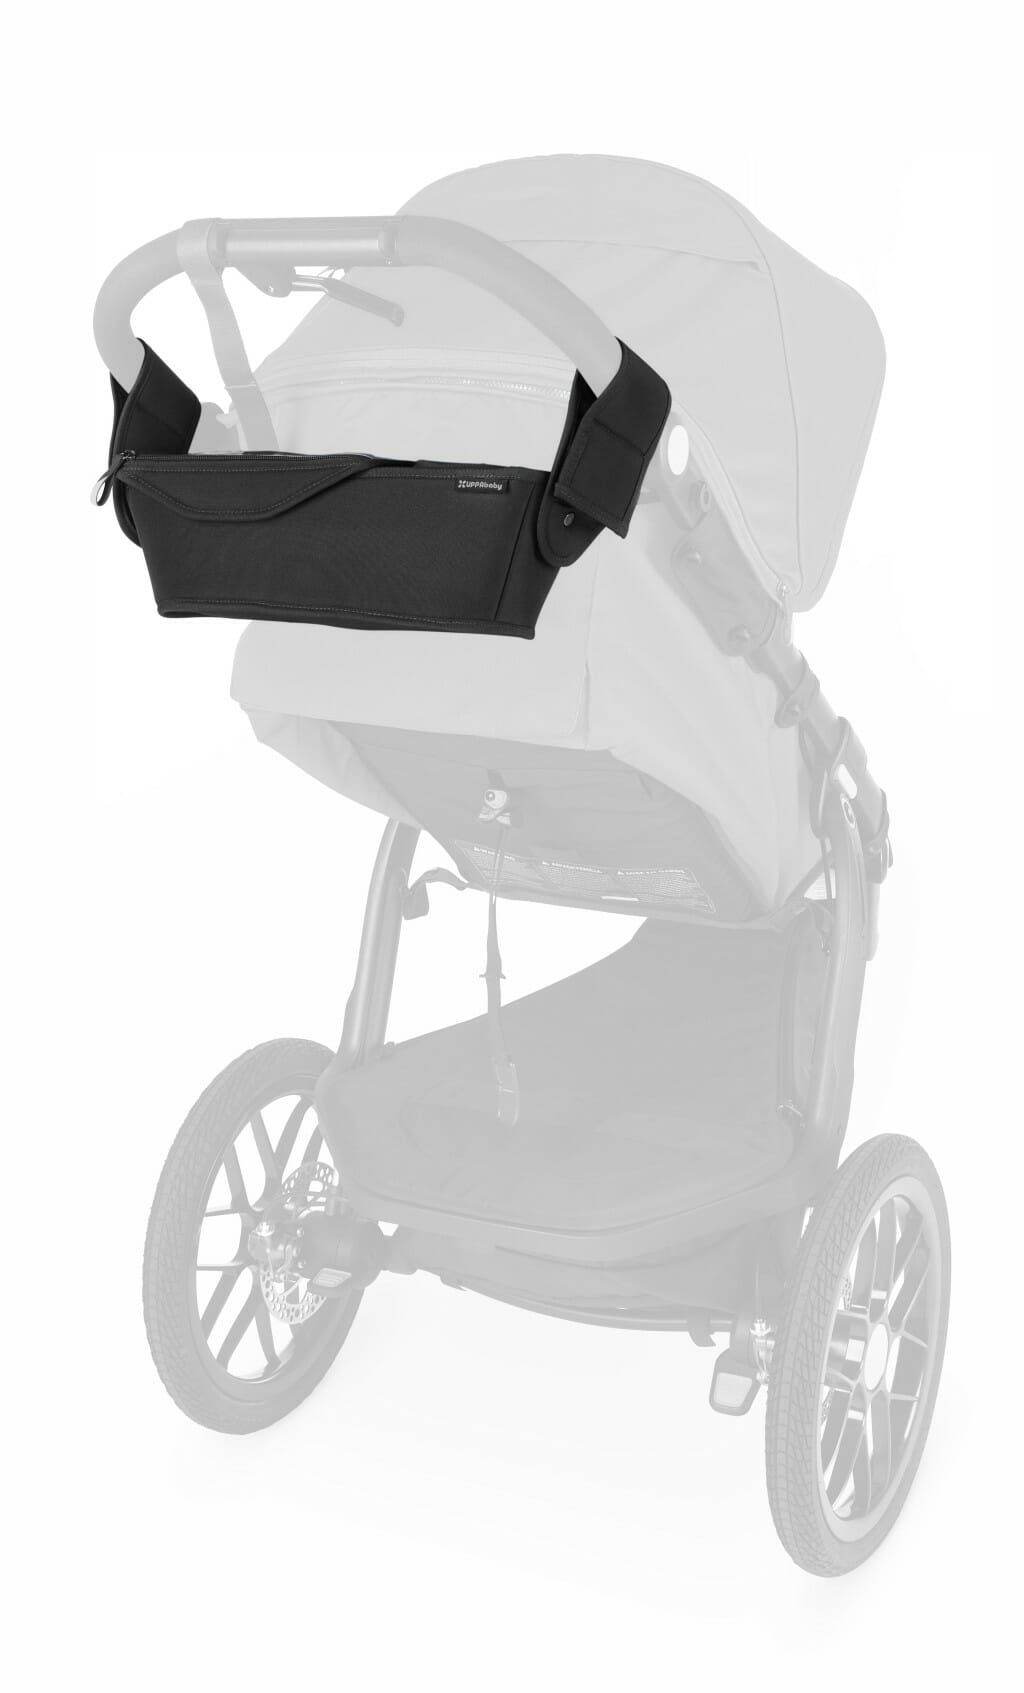 Parent Console On Uppababy Ridge Faded